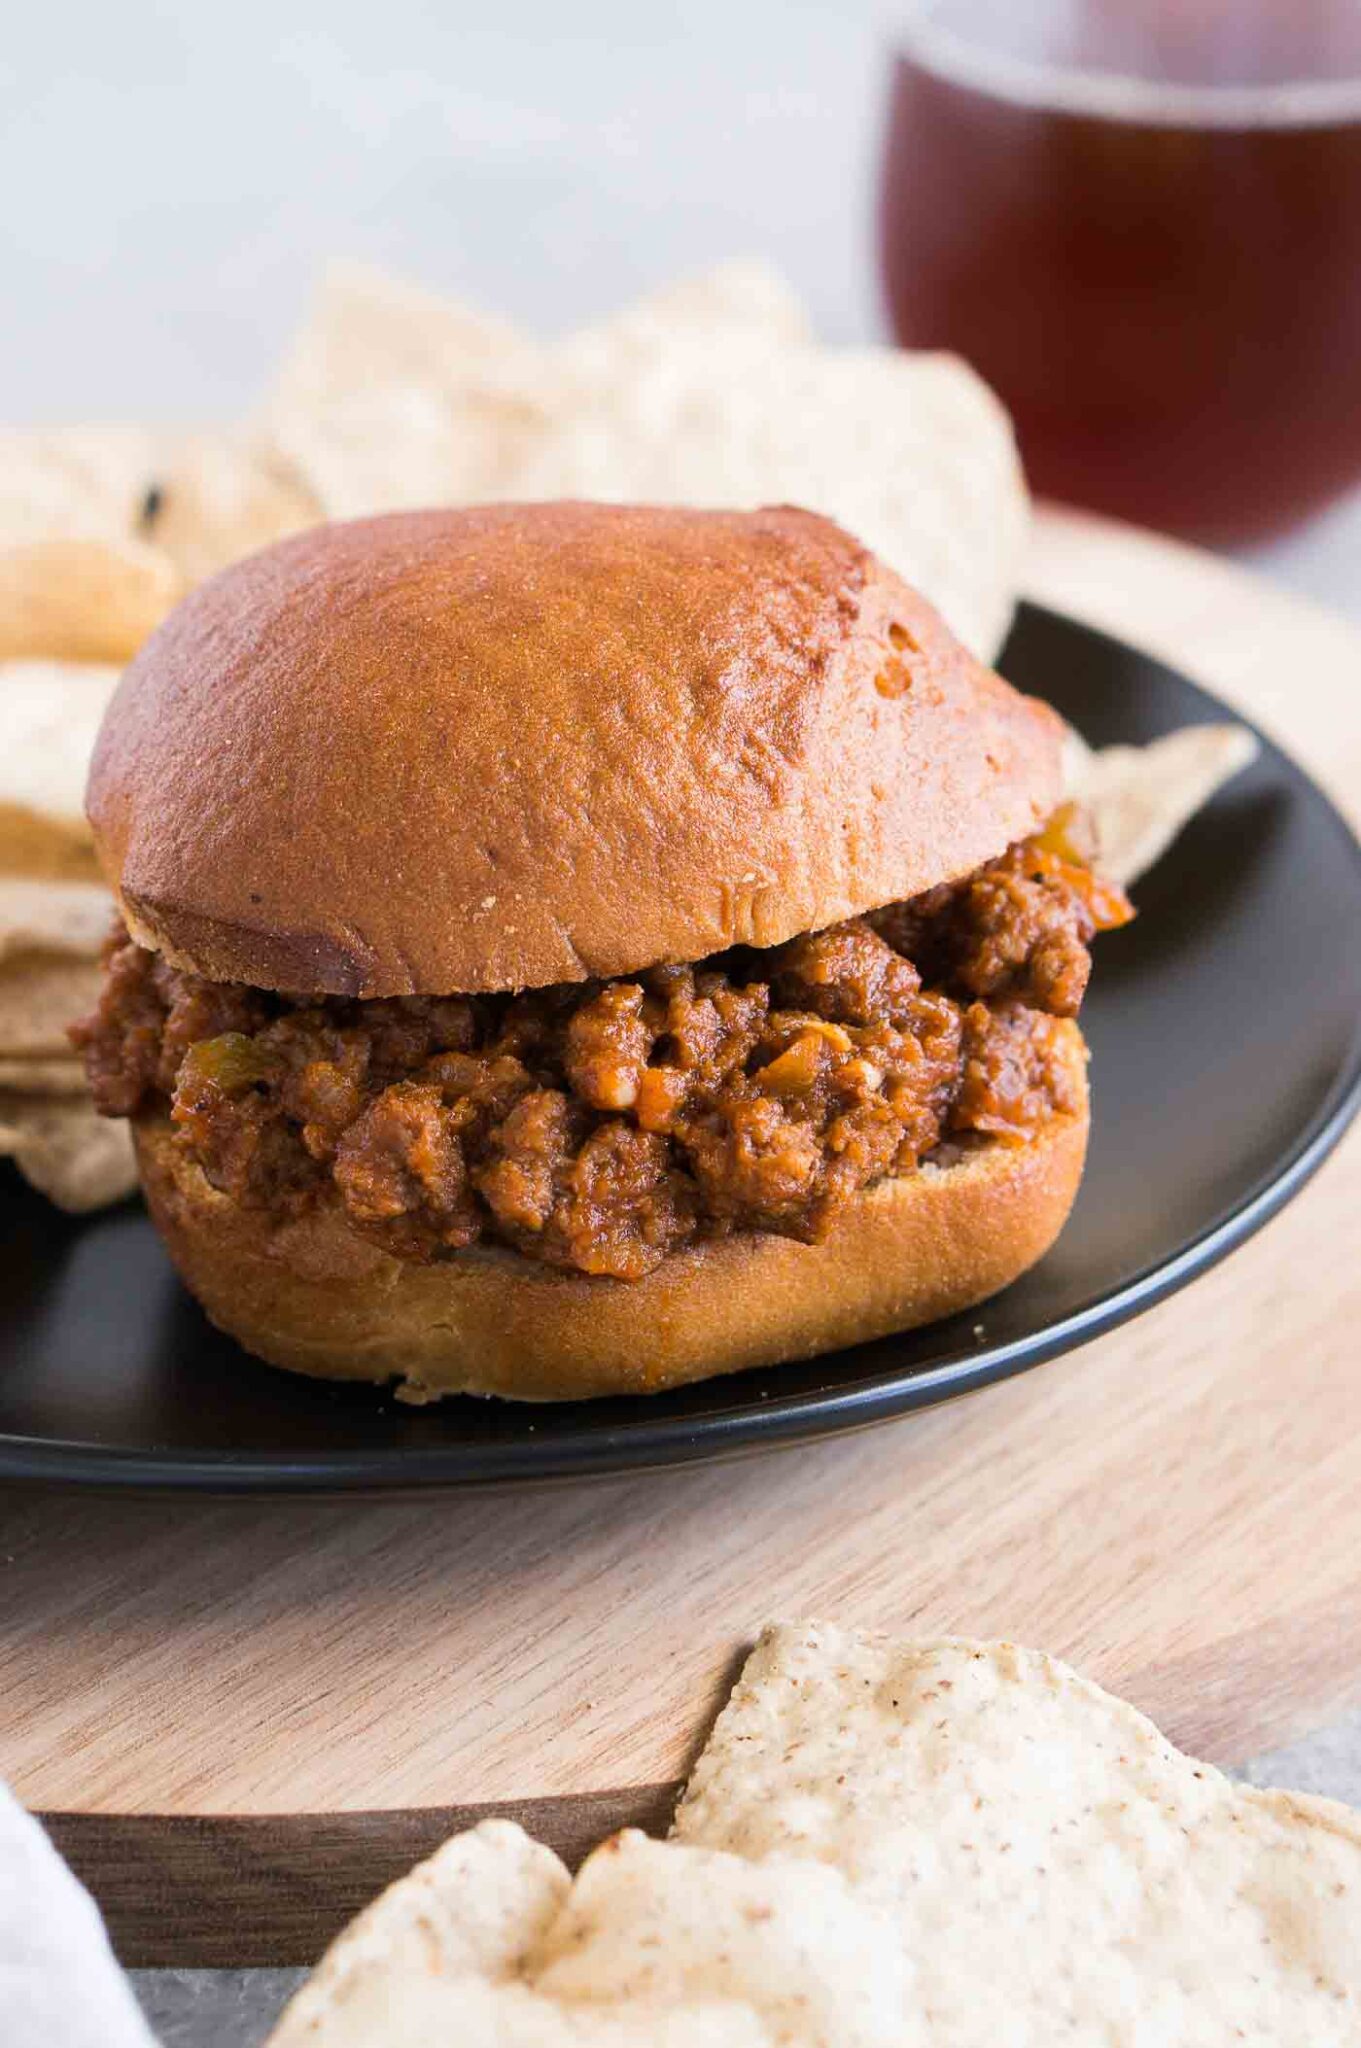 sloppy joes sandwich on a plate with chips